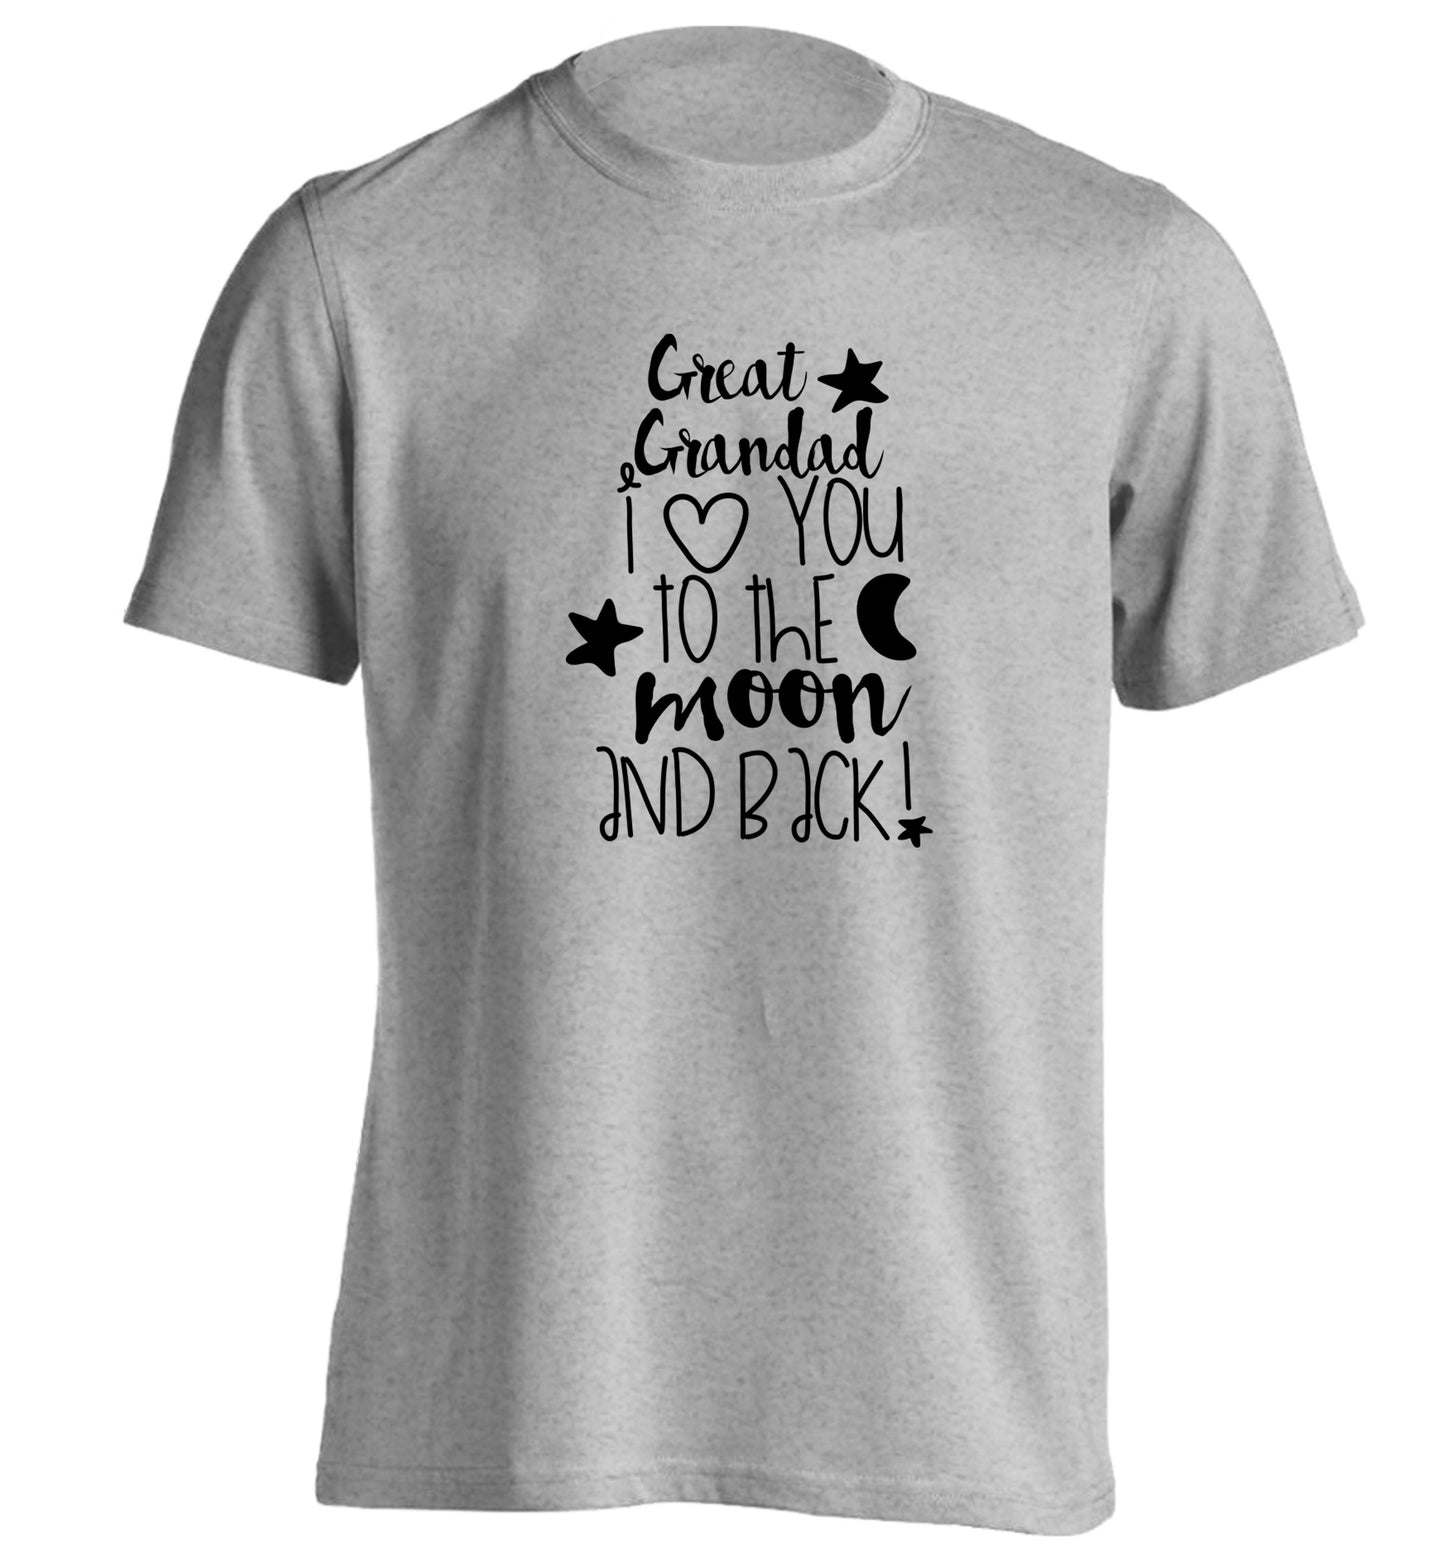 Great Grandad I love you to the moon and back adults unisex grey Tshirt 2XL